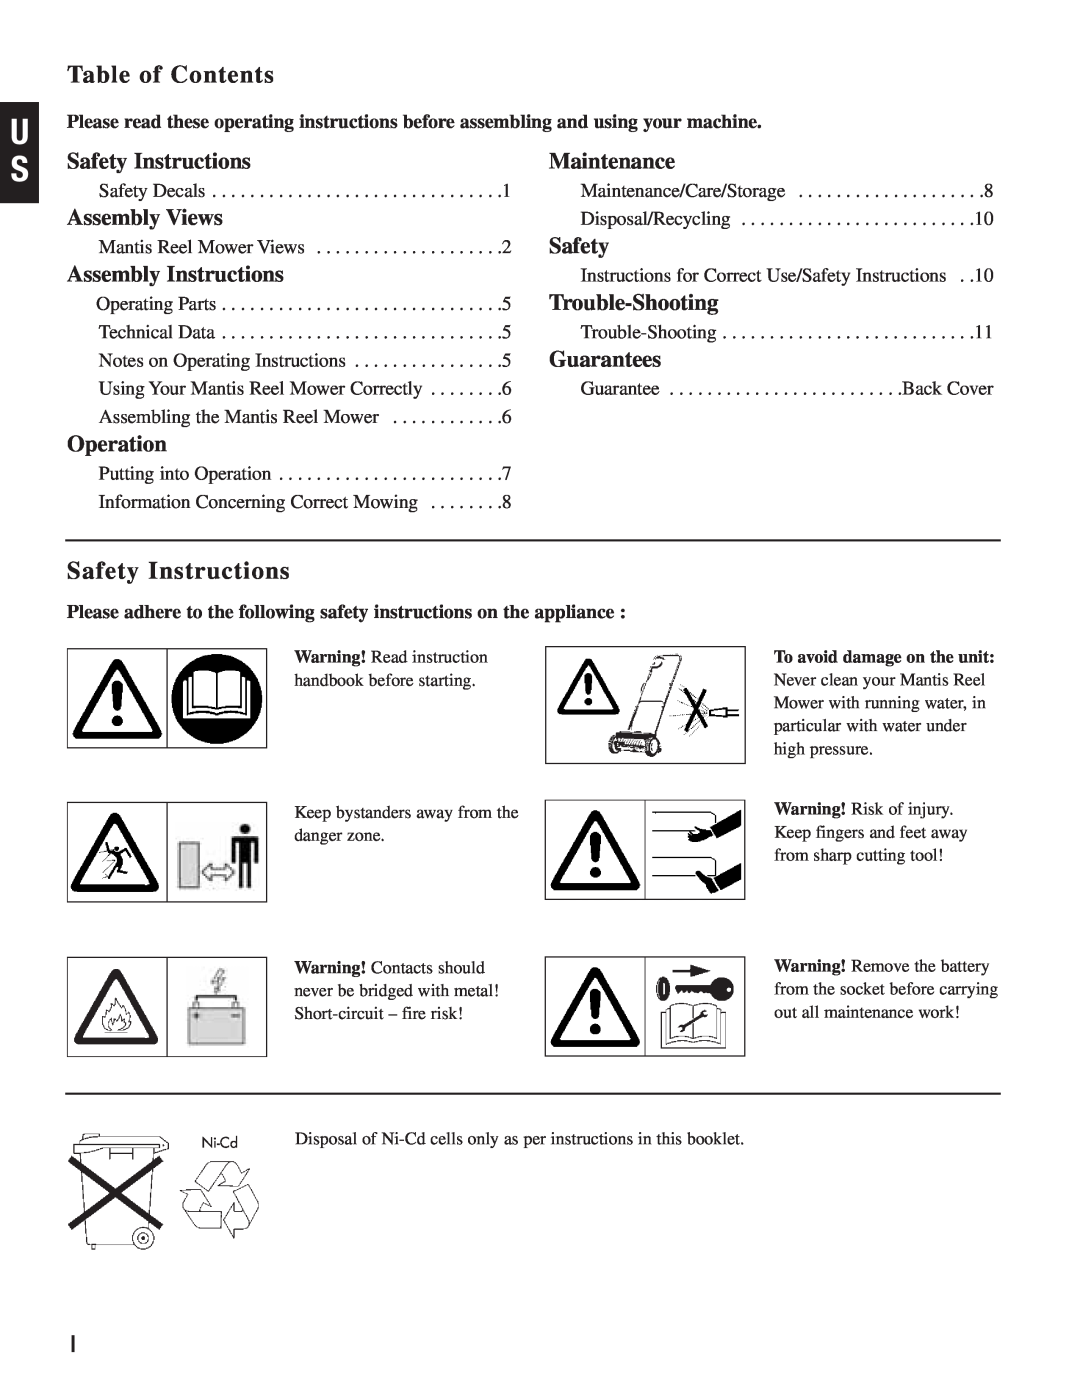 Mantis Reel Mower Table of Contents, Safety Instructions, Maintenance, Assembly Views, Assembly Instructions, Guarantees 